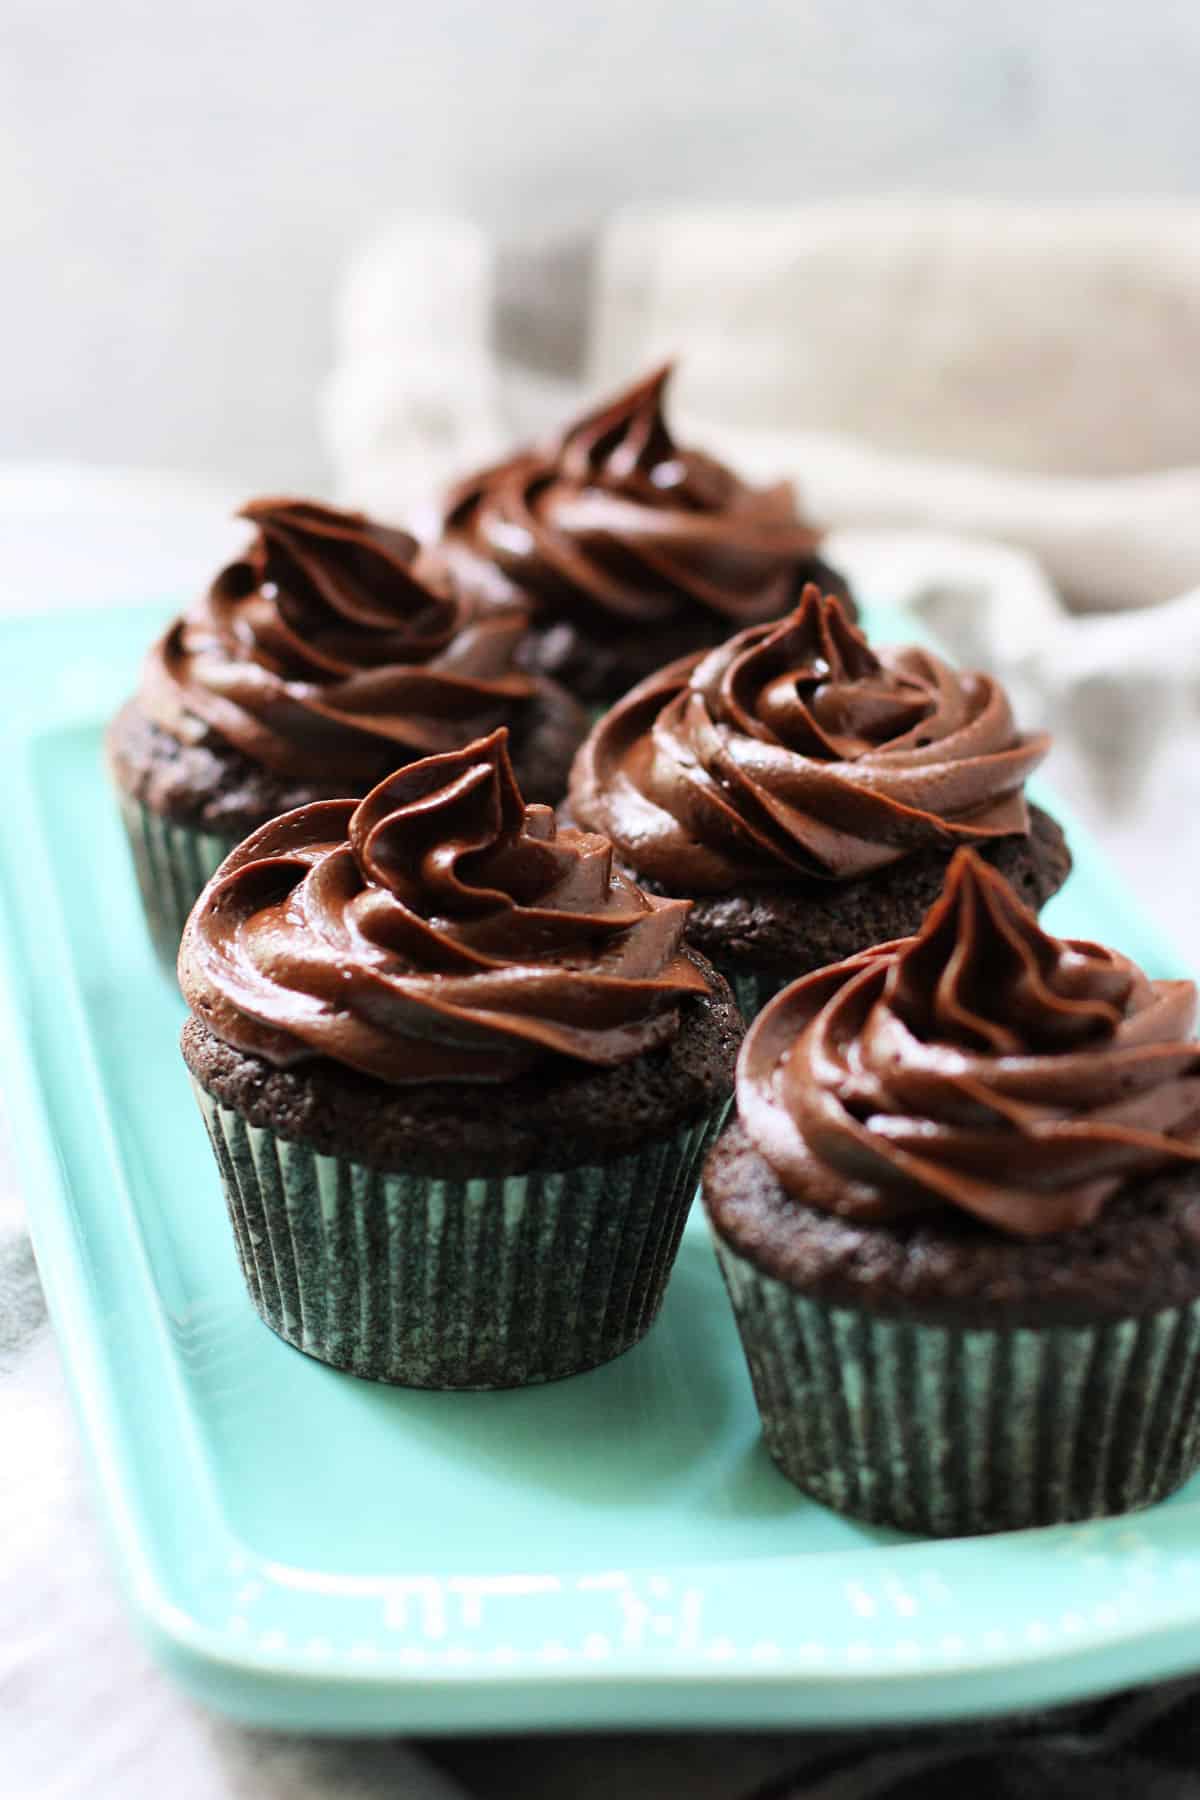 vegan gluten free chocolate cupcakes with chocolate frosting on a teal tray